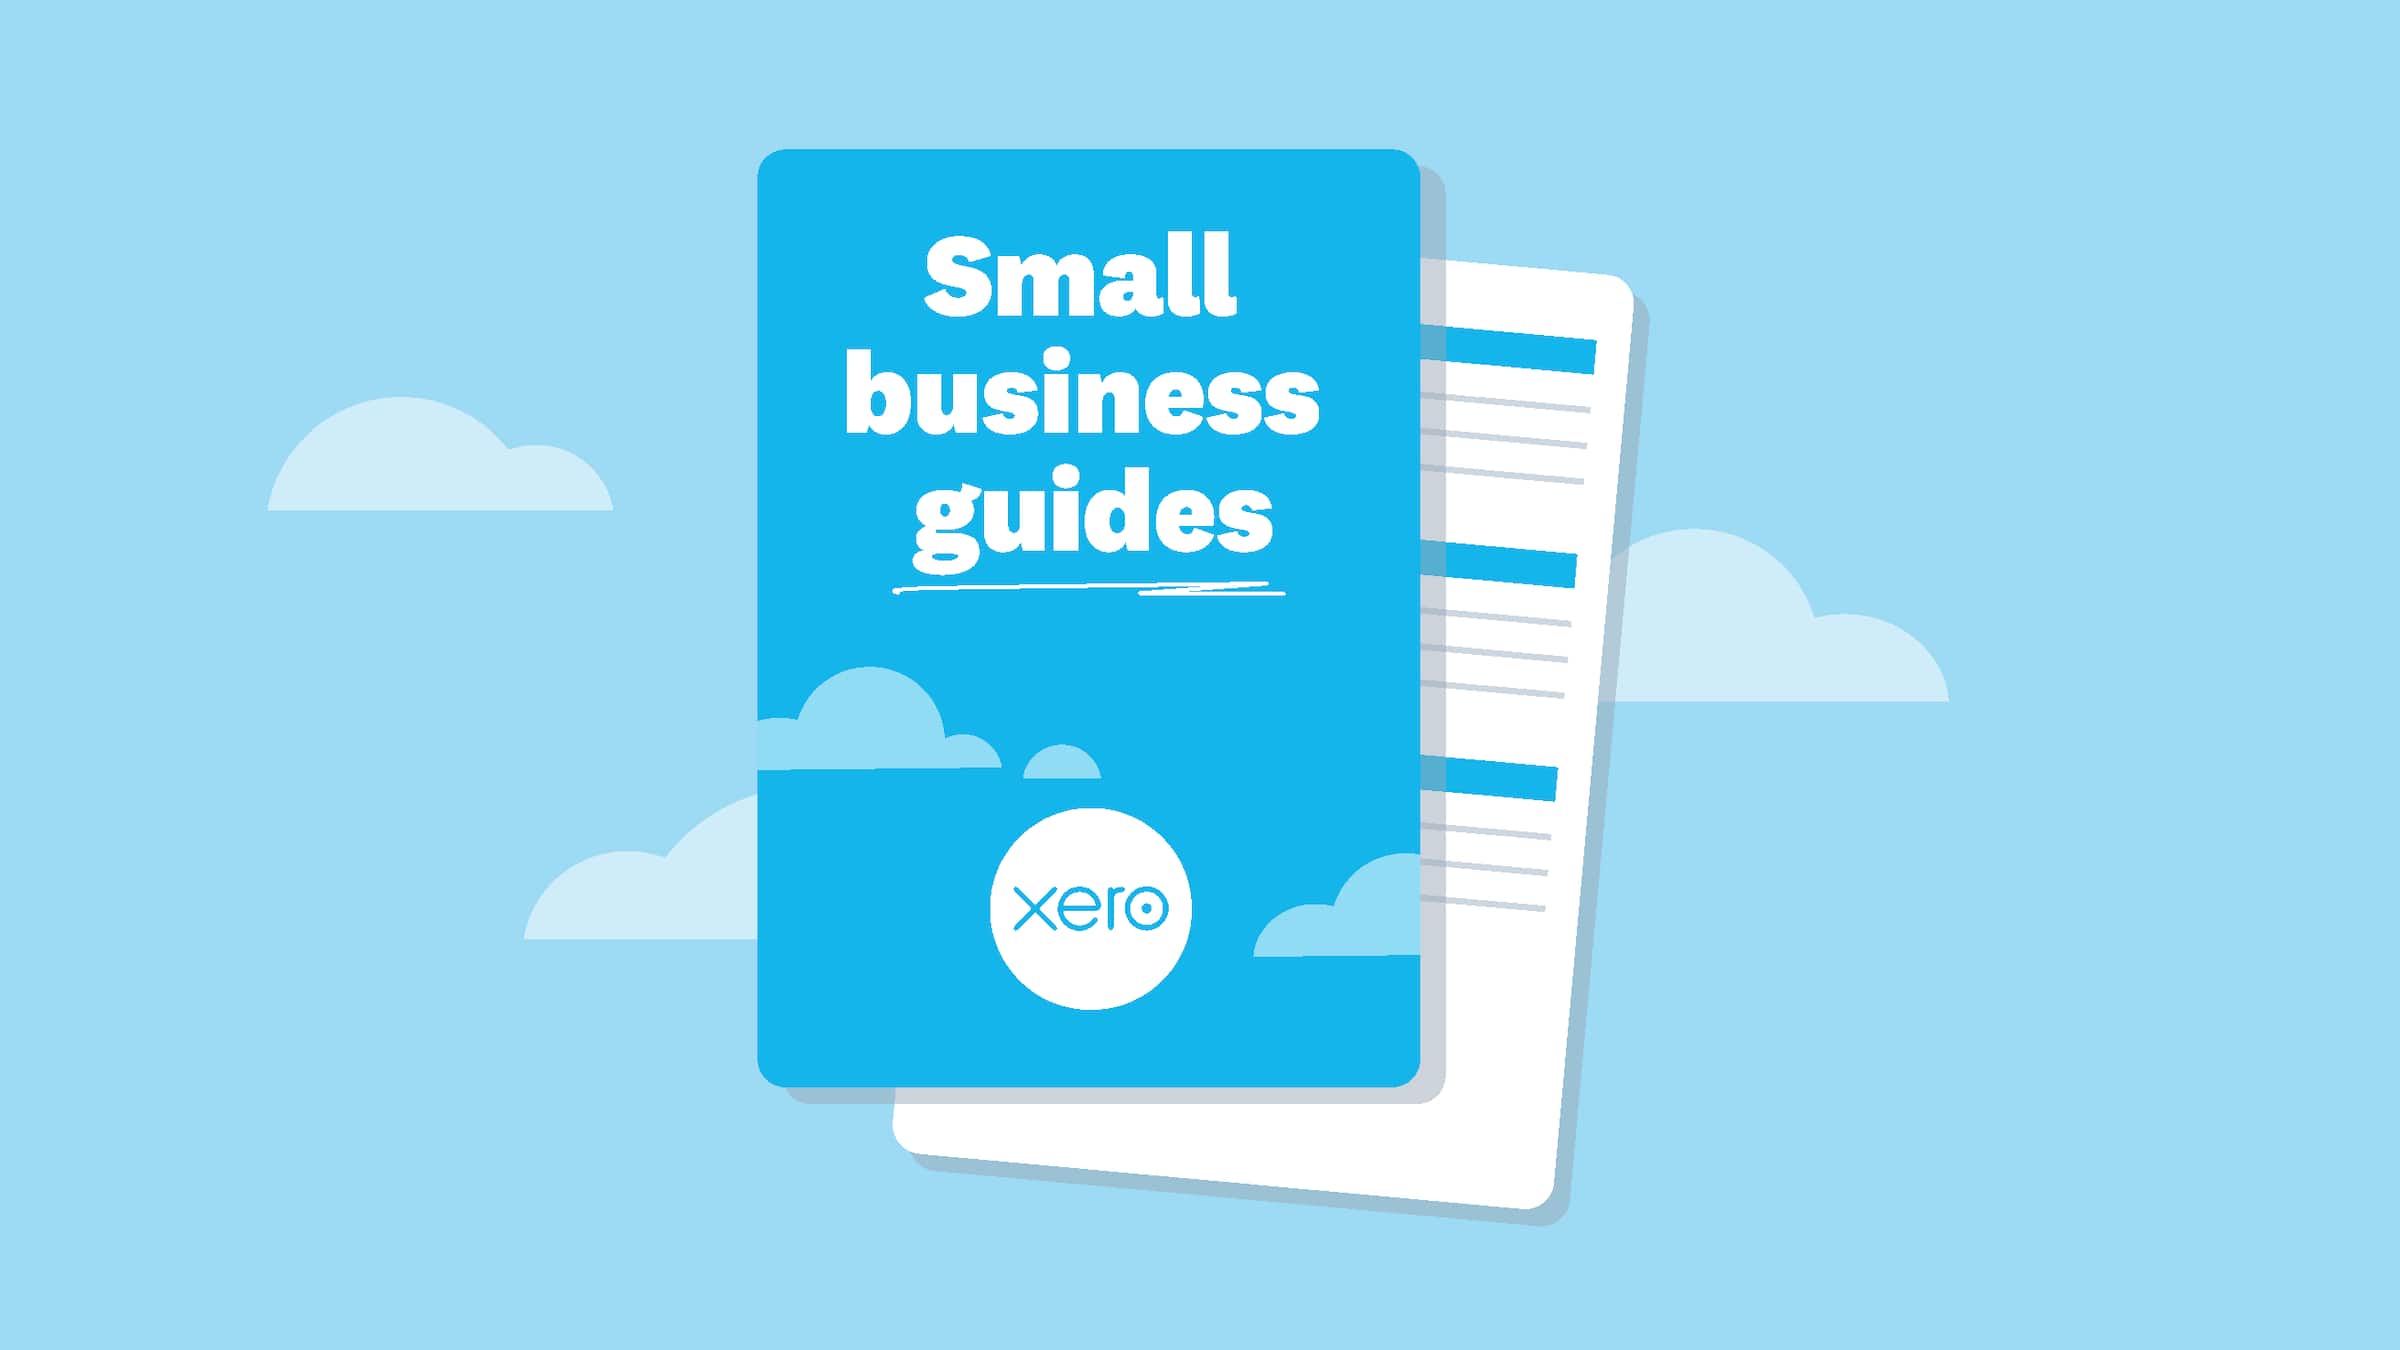 Small business guides by Xero